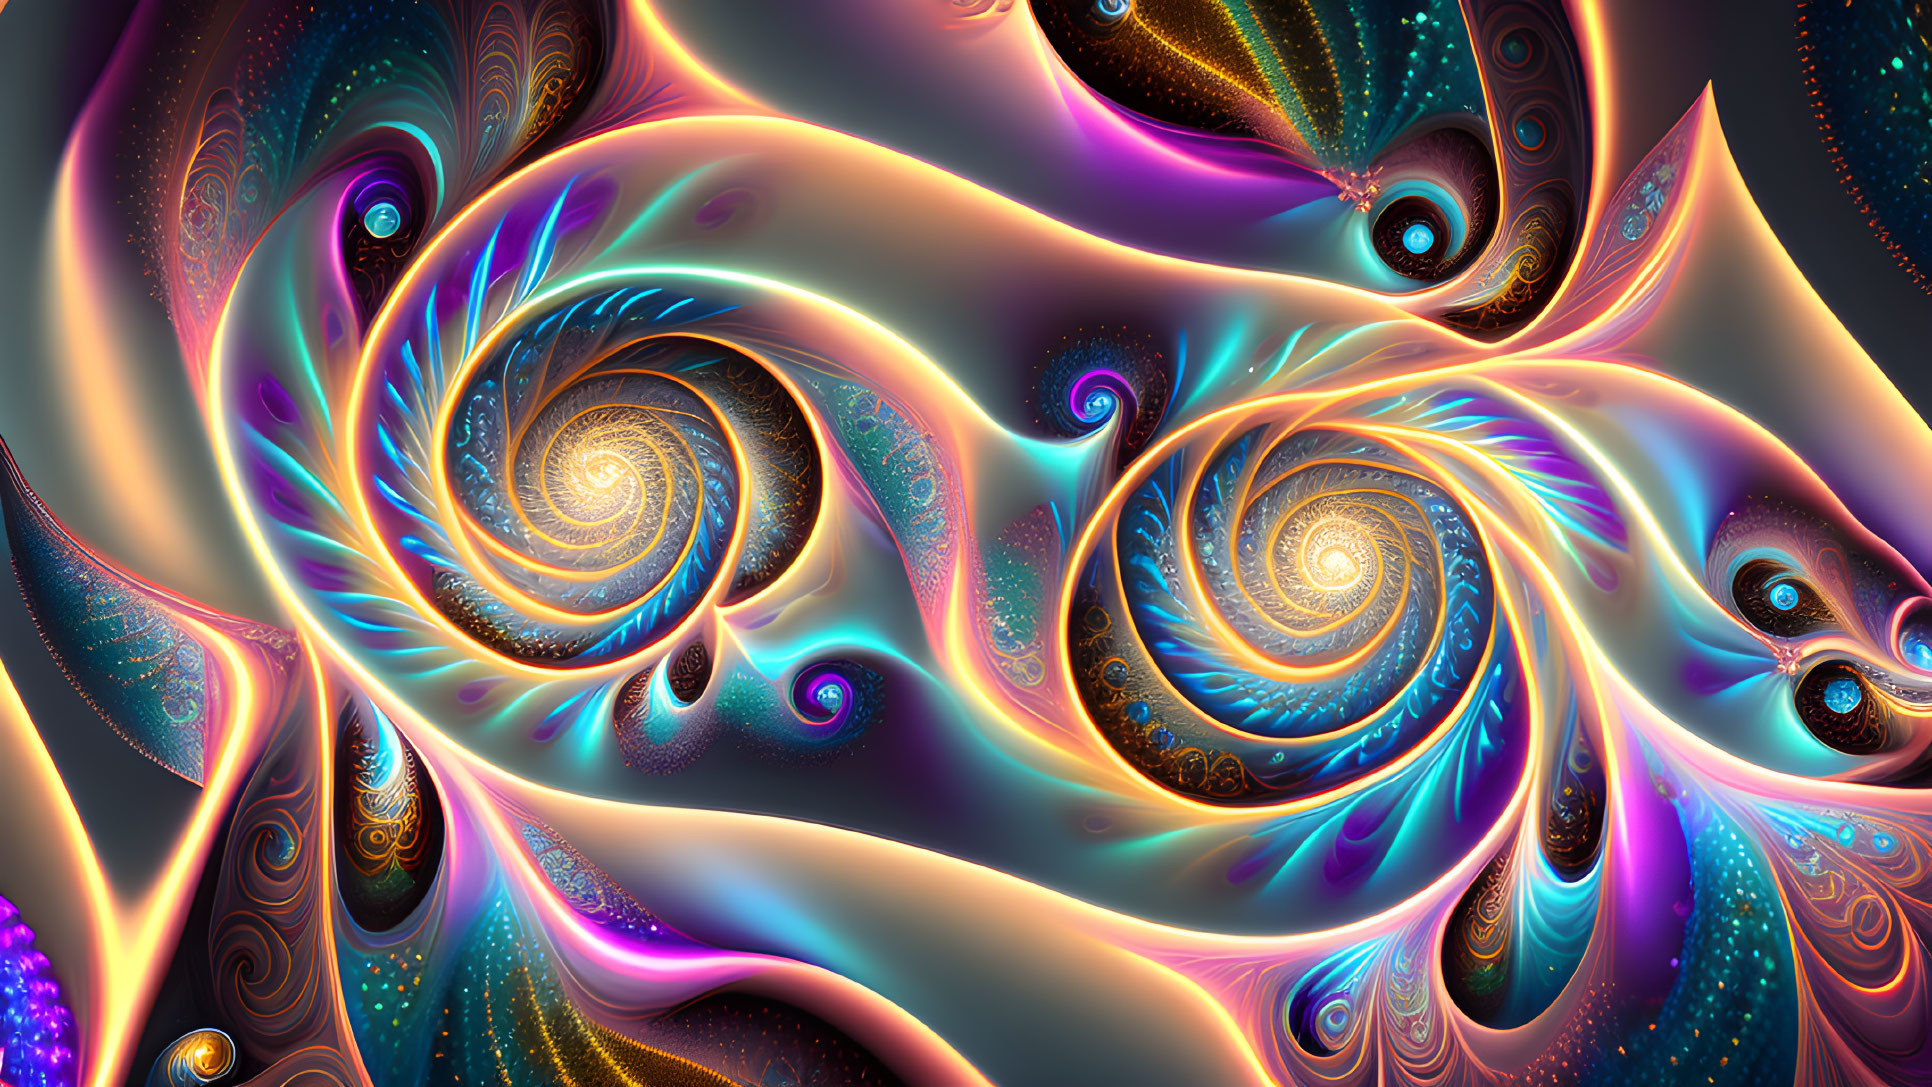 Colorful Abstract Fractal Image with Swirling Blue, Gold, and Purple Patterns